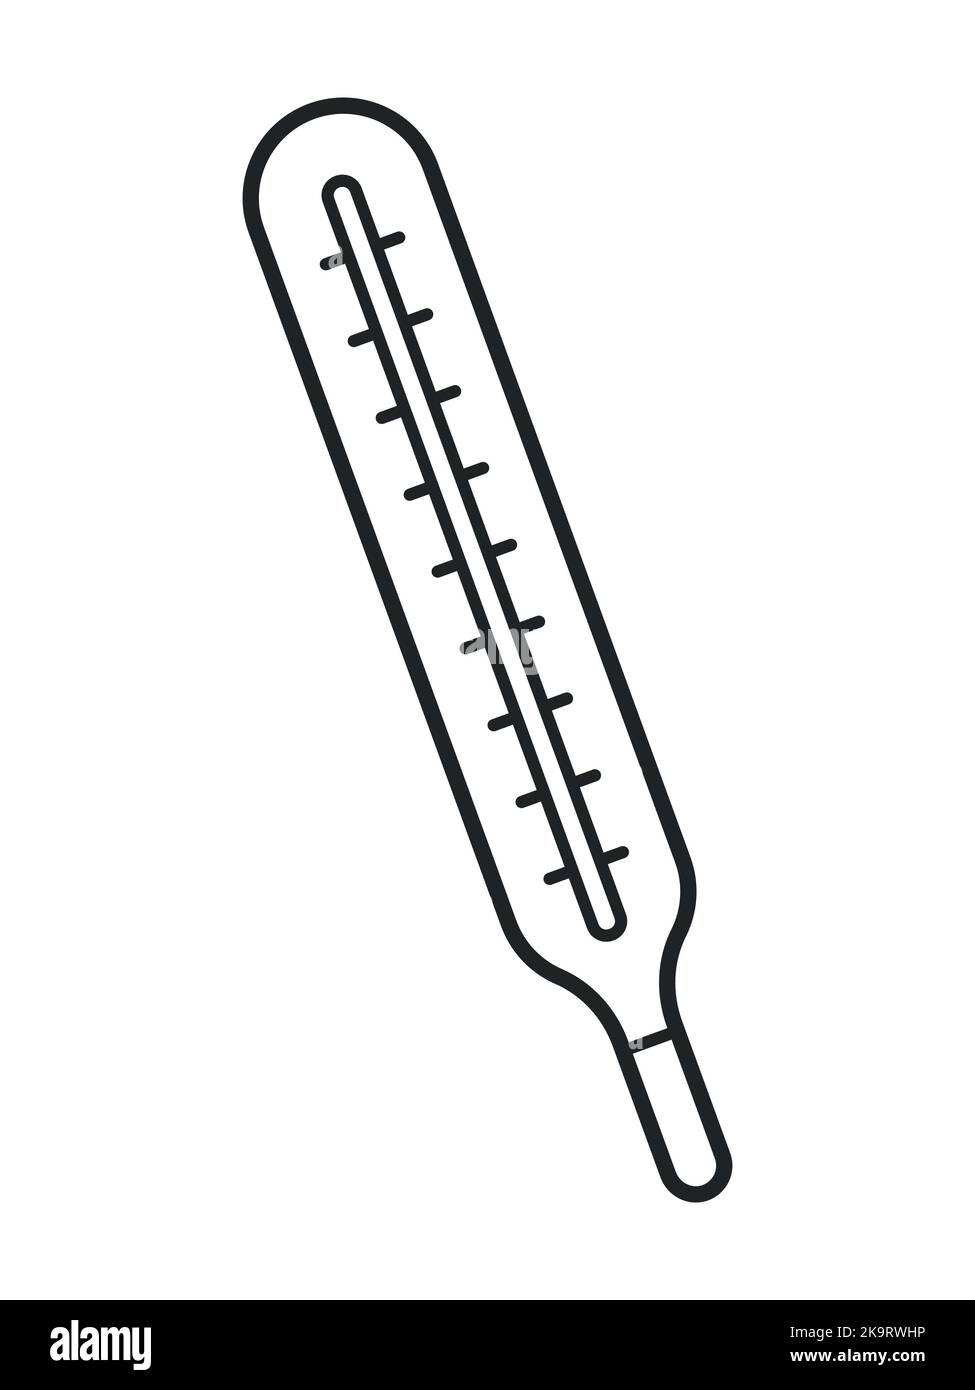 Medical thermometer symbol vector icon Stock Vector